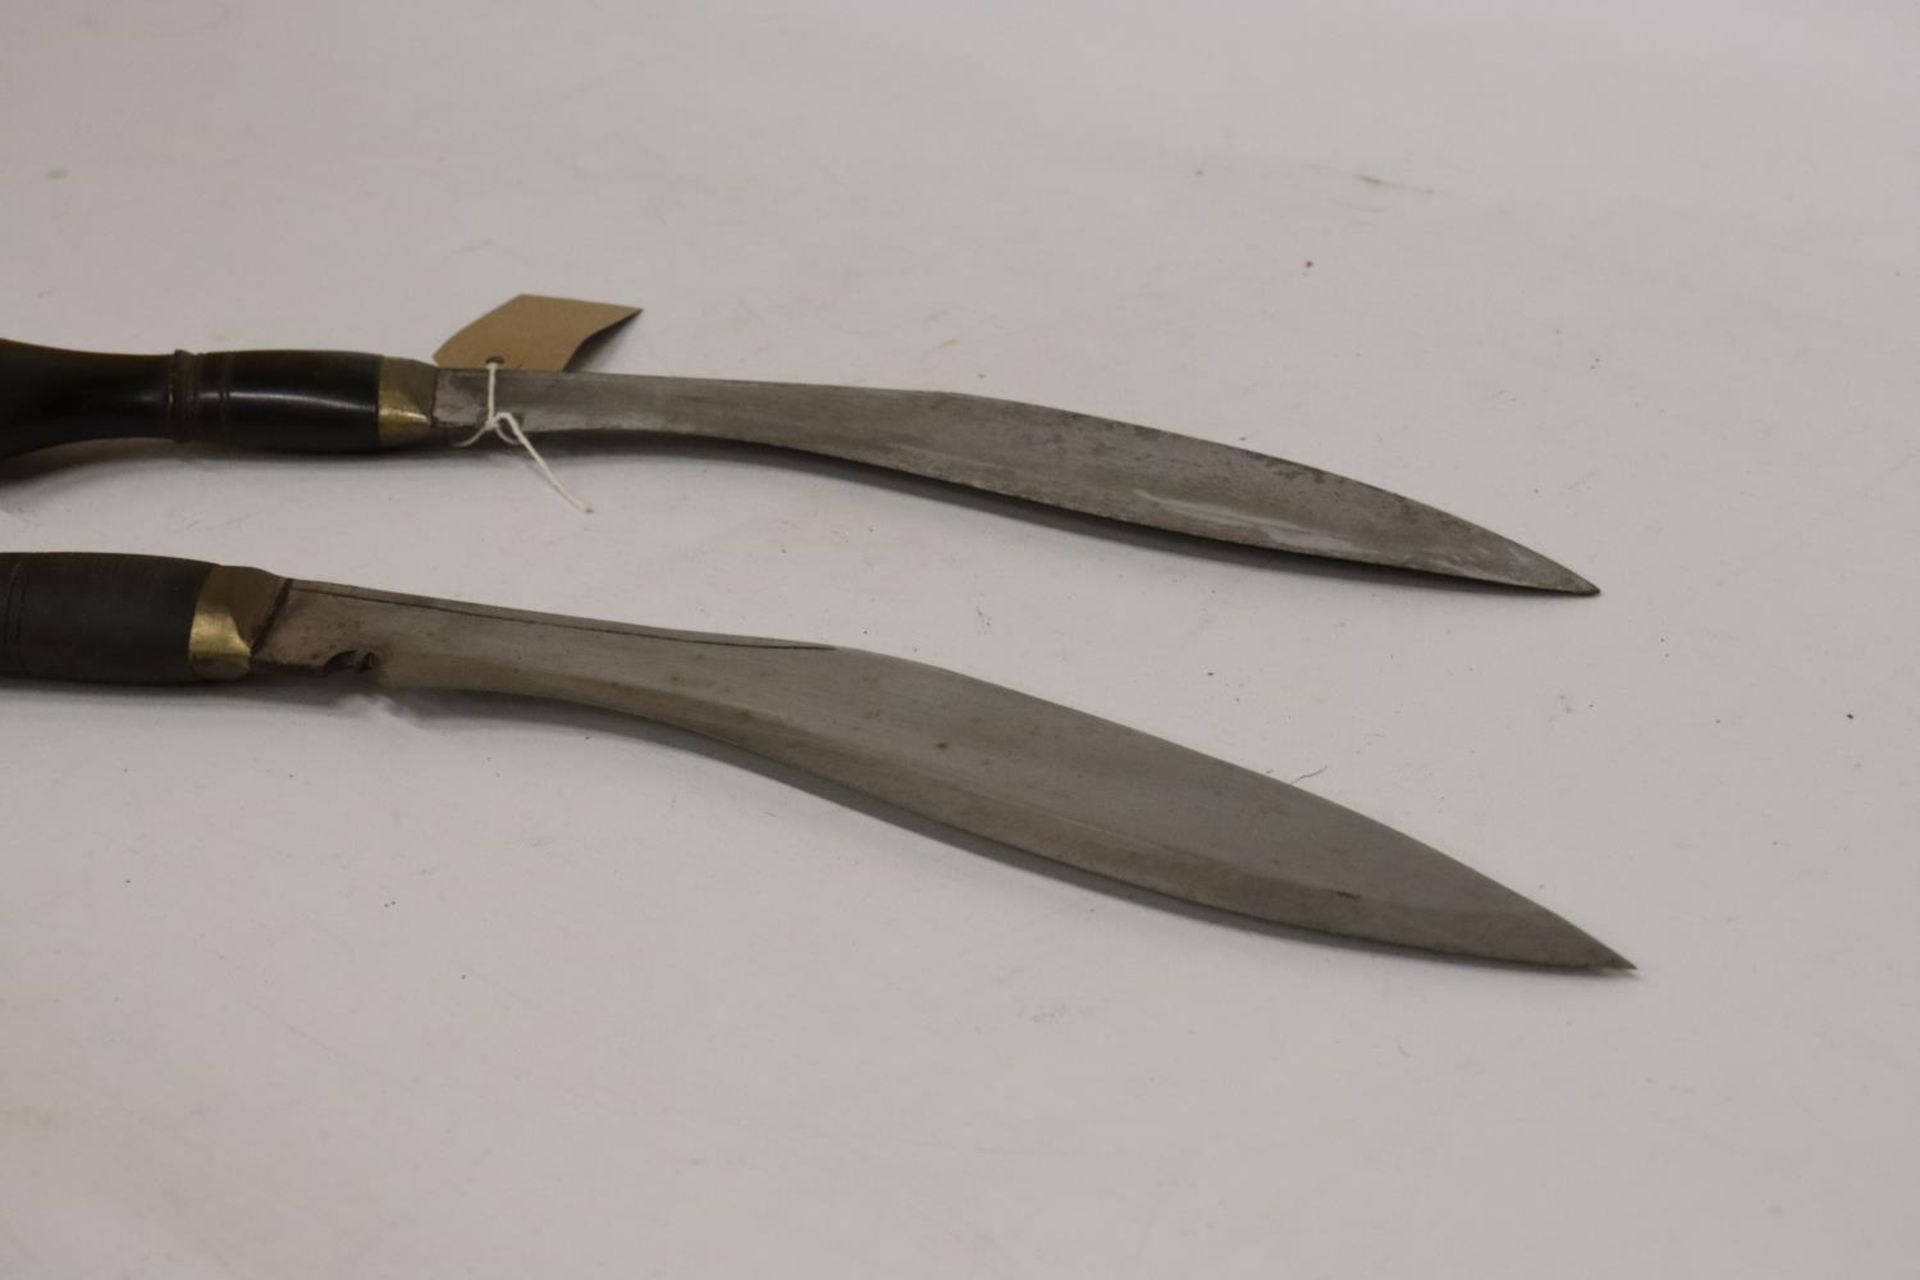 TWO MID 20TH CENTURY KUKRI KNIVES, 28CM BLADES - Image 5 of 6